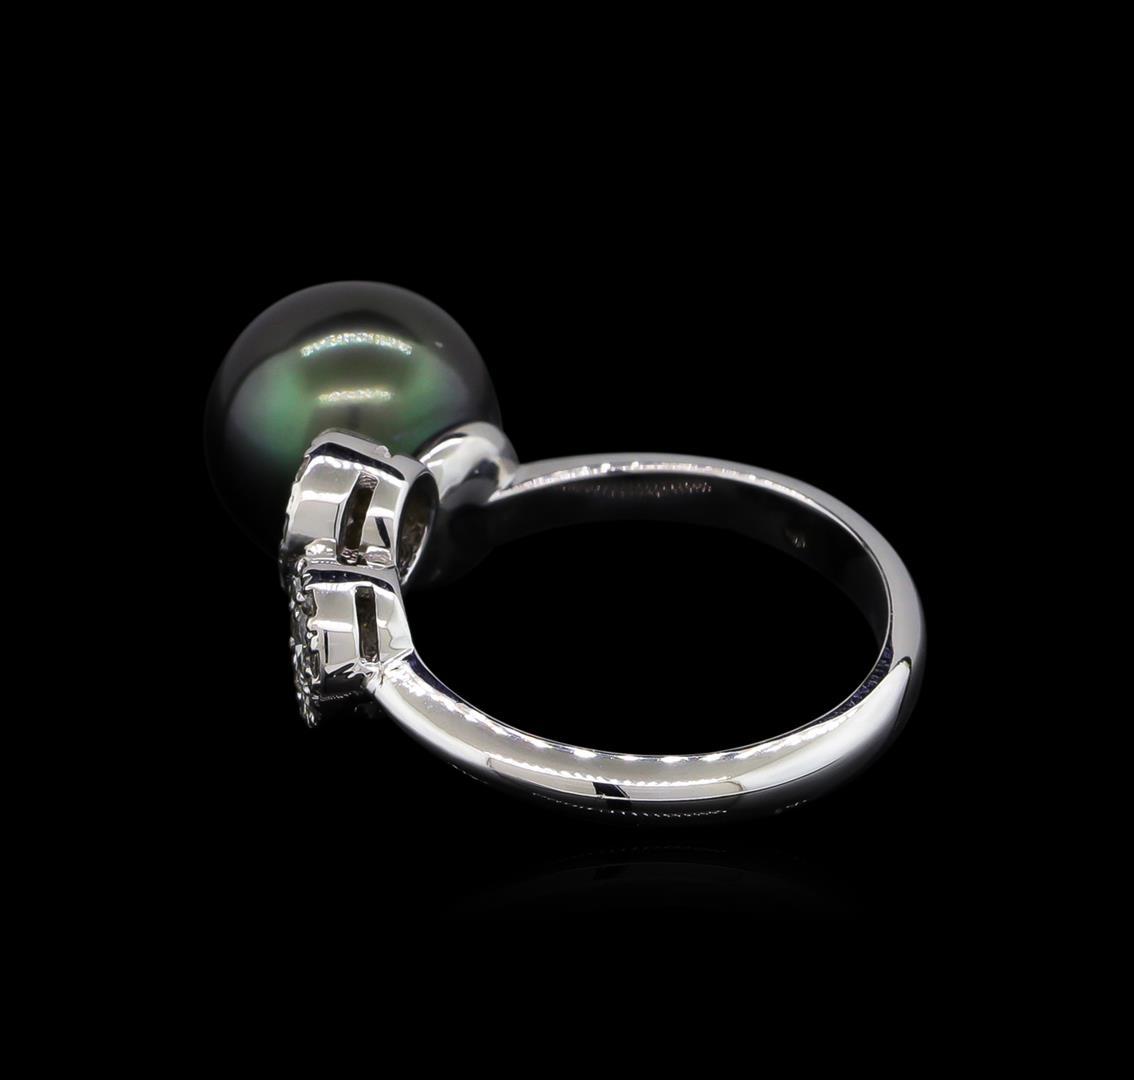 0.37 ctw Pearl and Diamond Ring - 14KT White Gold